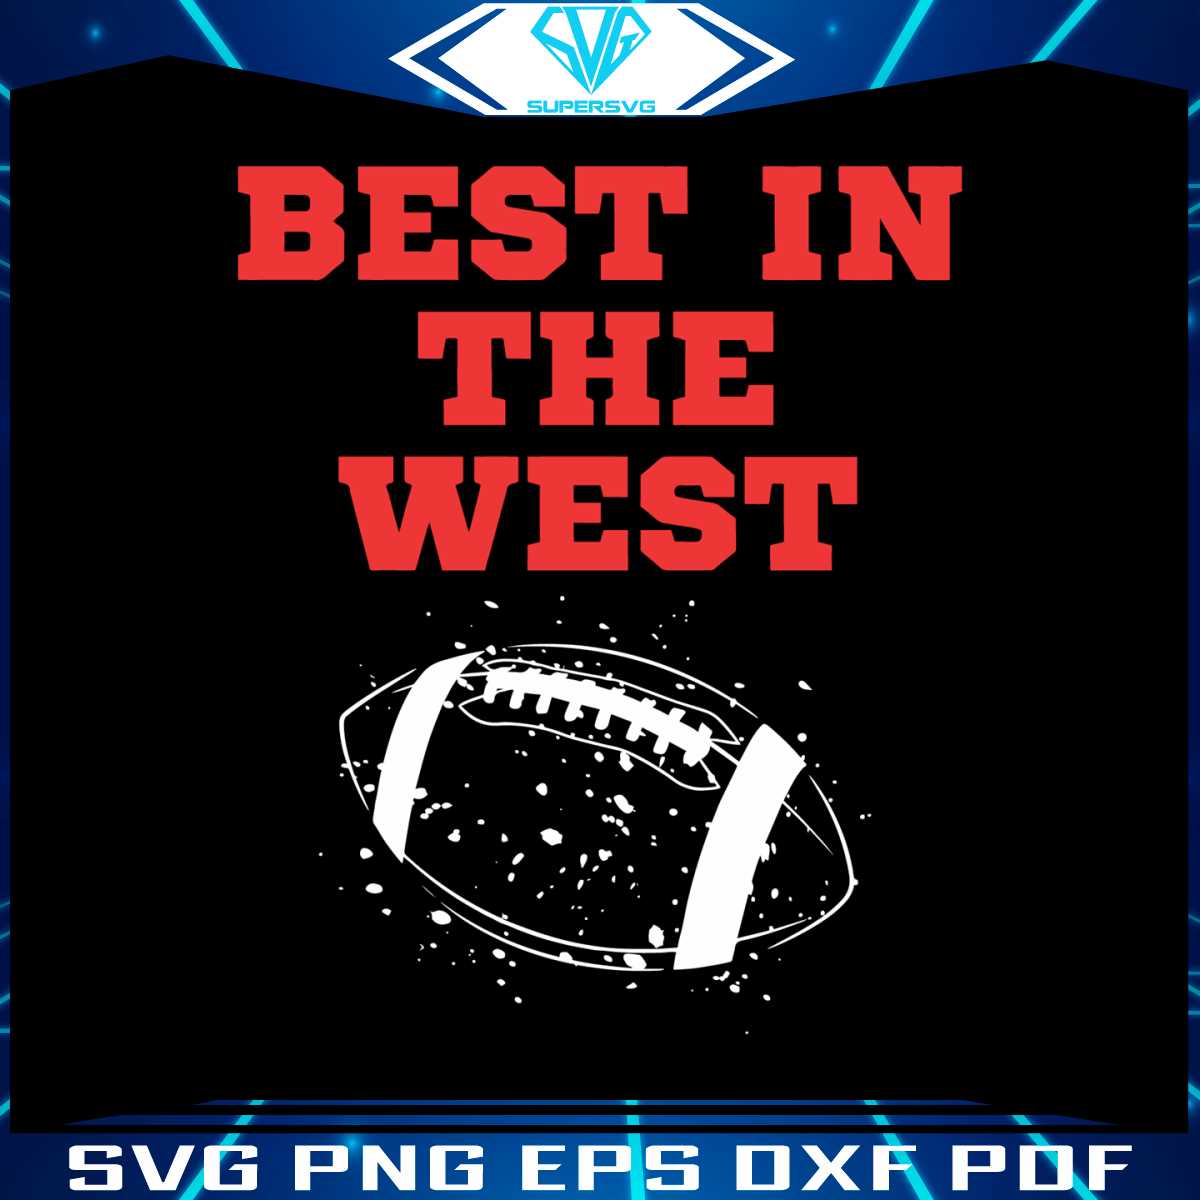 kansas-city-football-best-in-the-west-svg